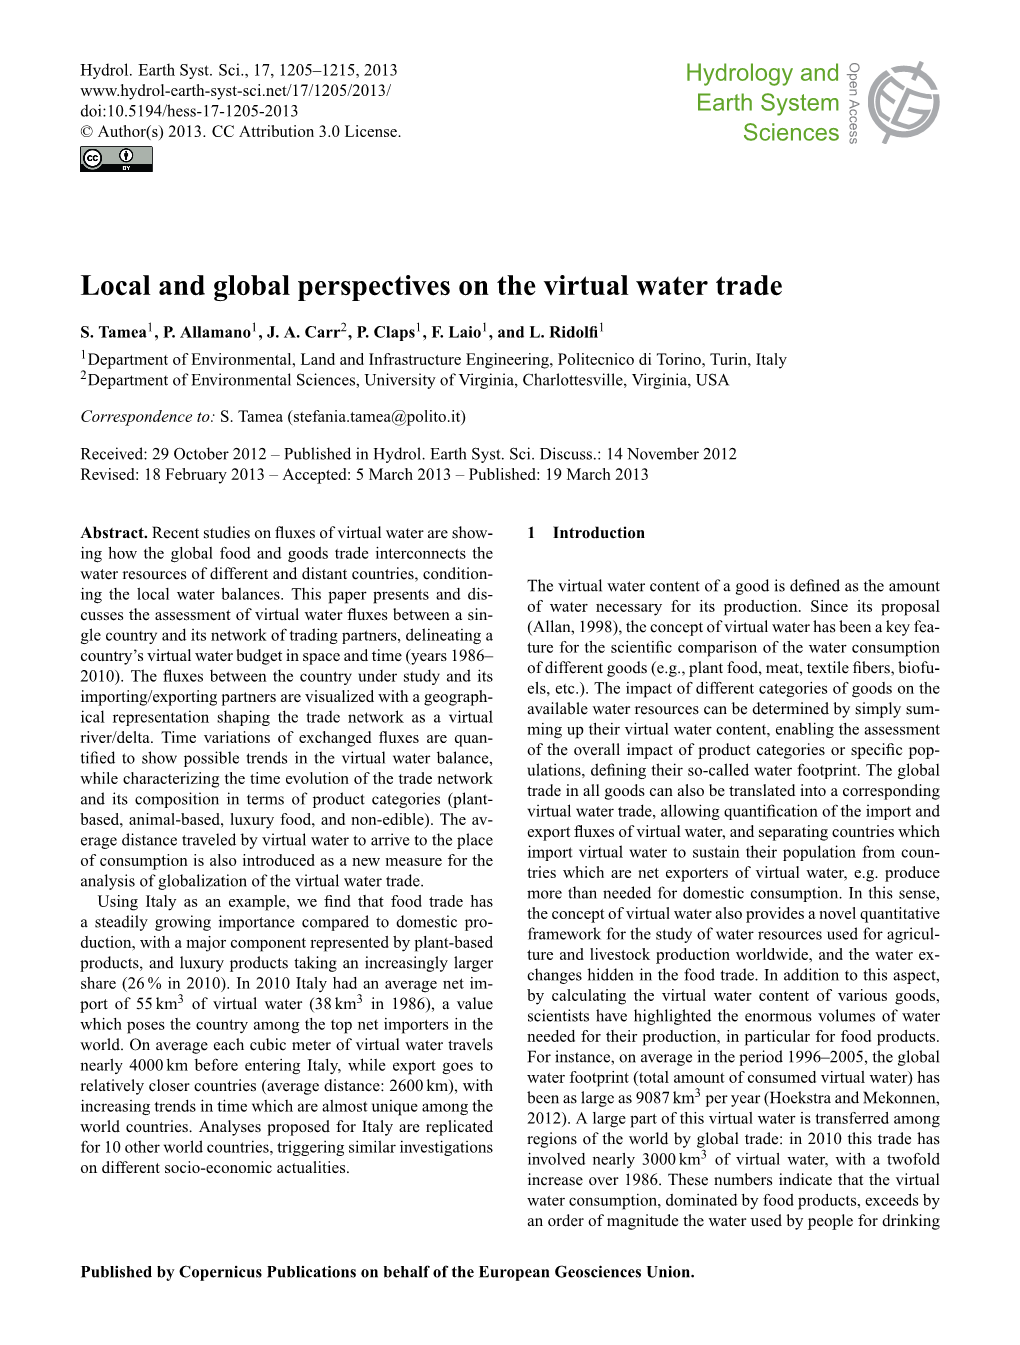 Local and Global Perspectives on the Virtual Water Trade Open Access Open Access S